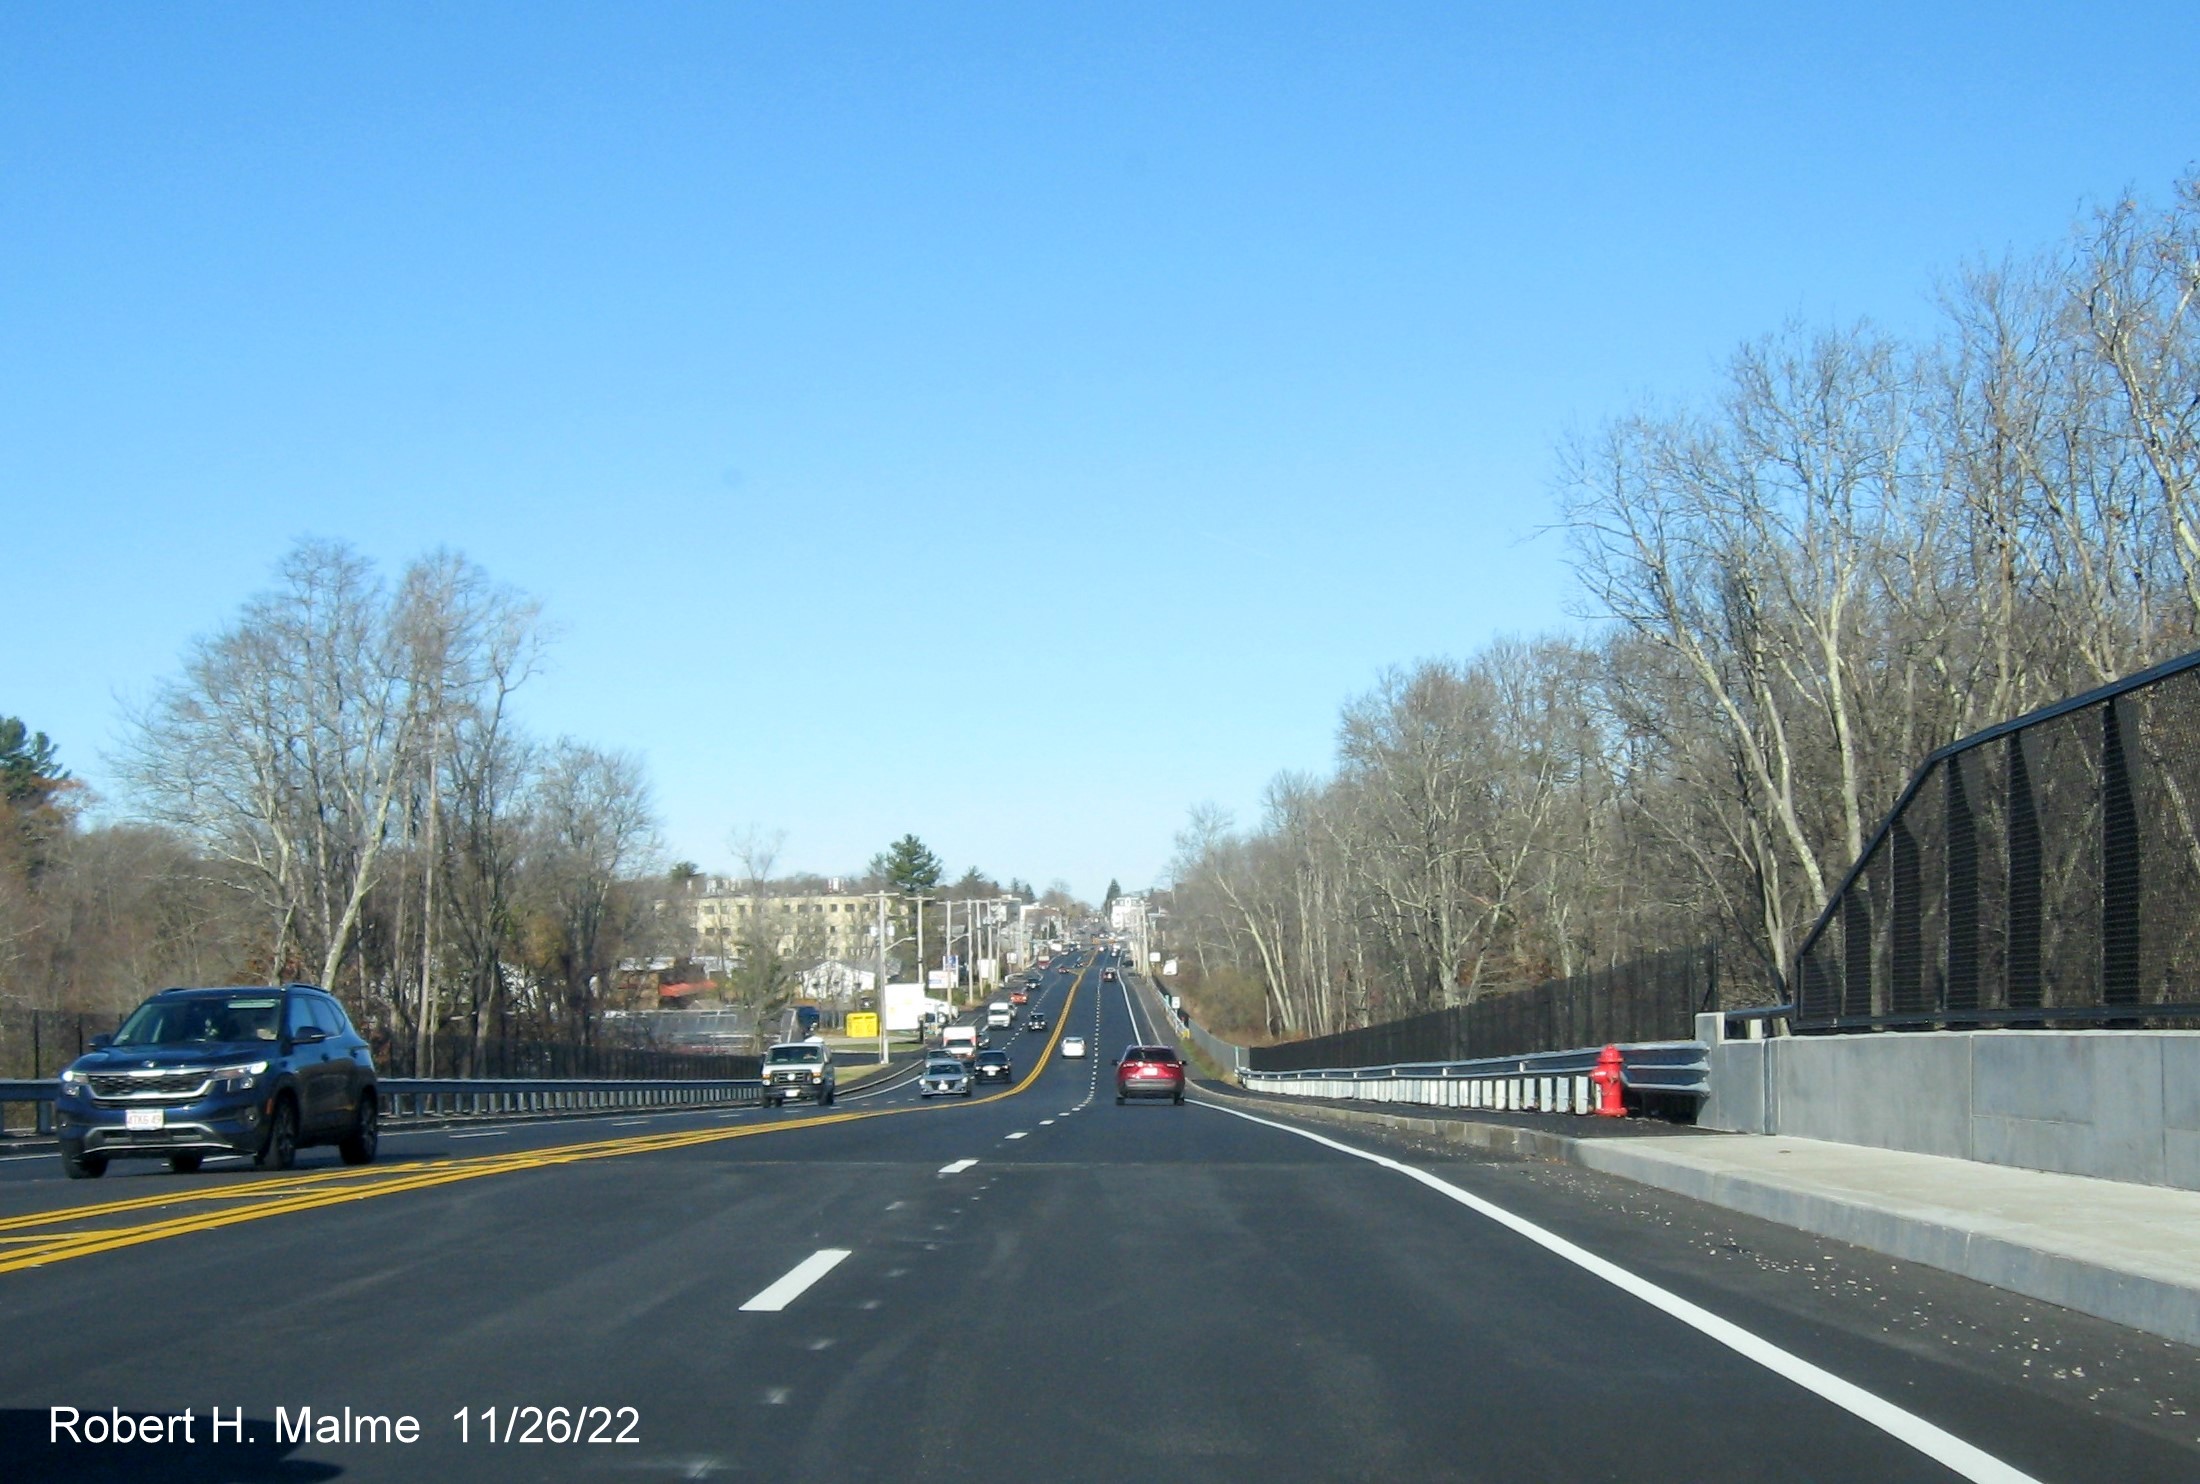 Image of MA 18 North traffic heading down completed commuter railroad bridge in South Weymouth, November 2022